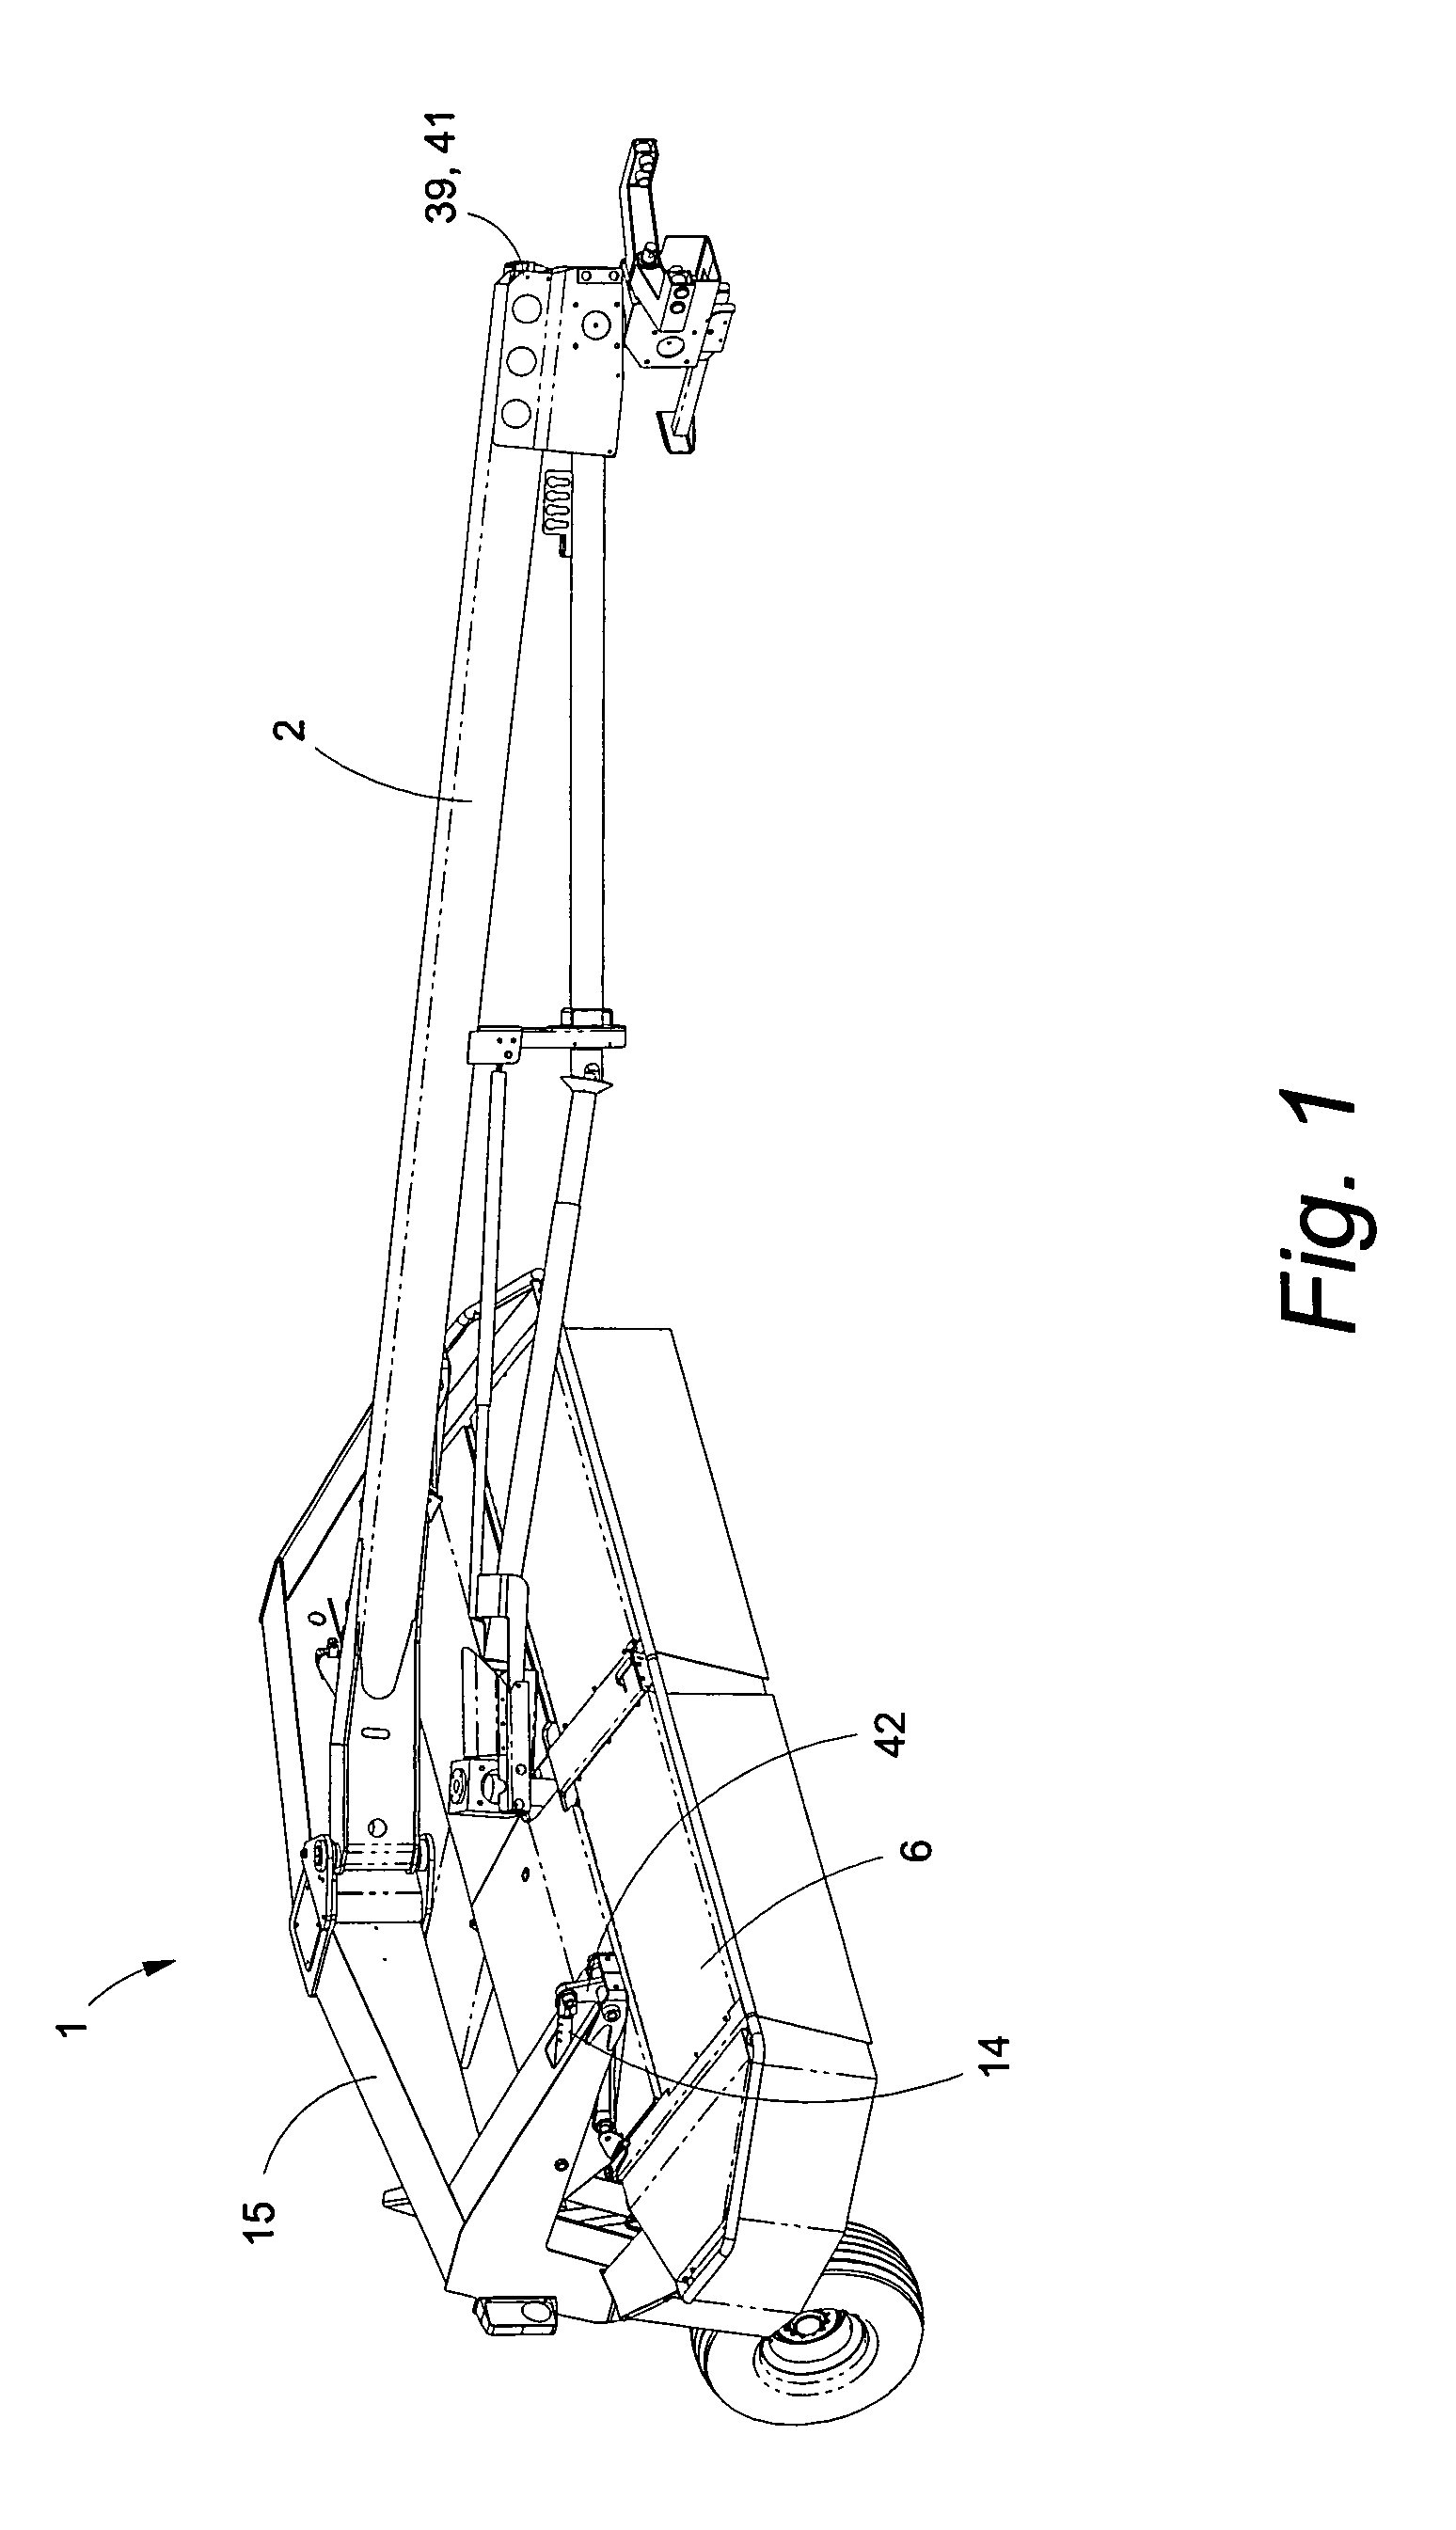 Suspension system for a floating header on an agricultural implement